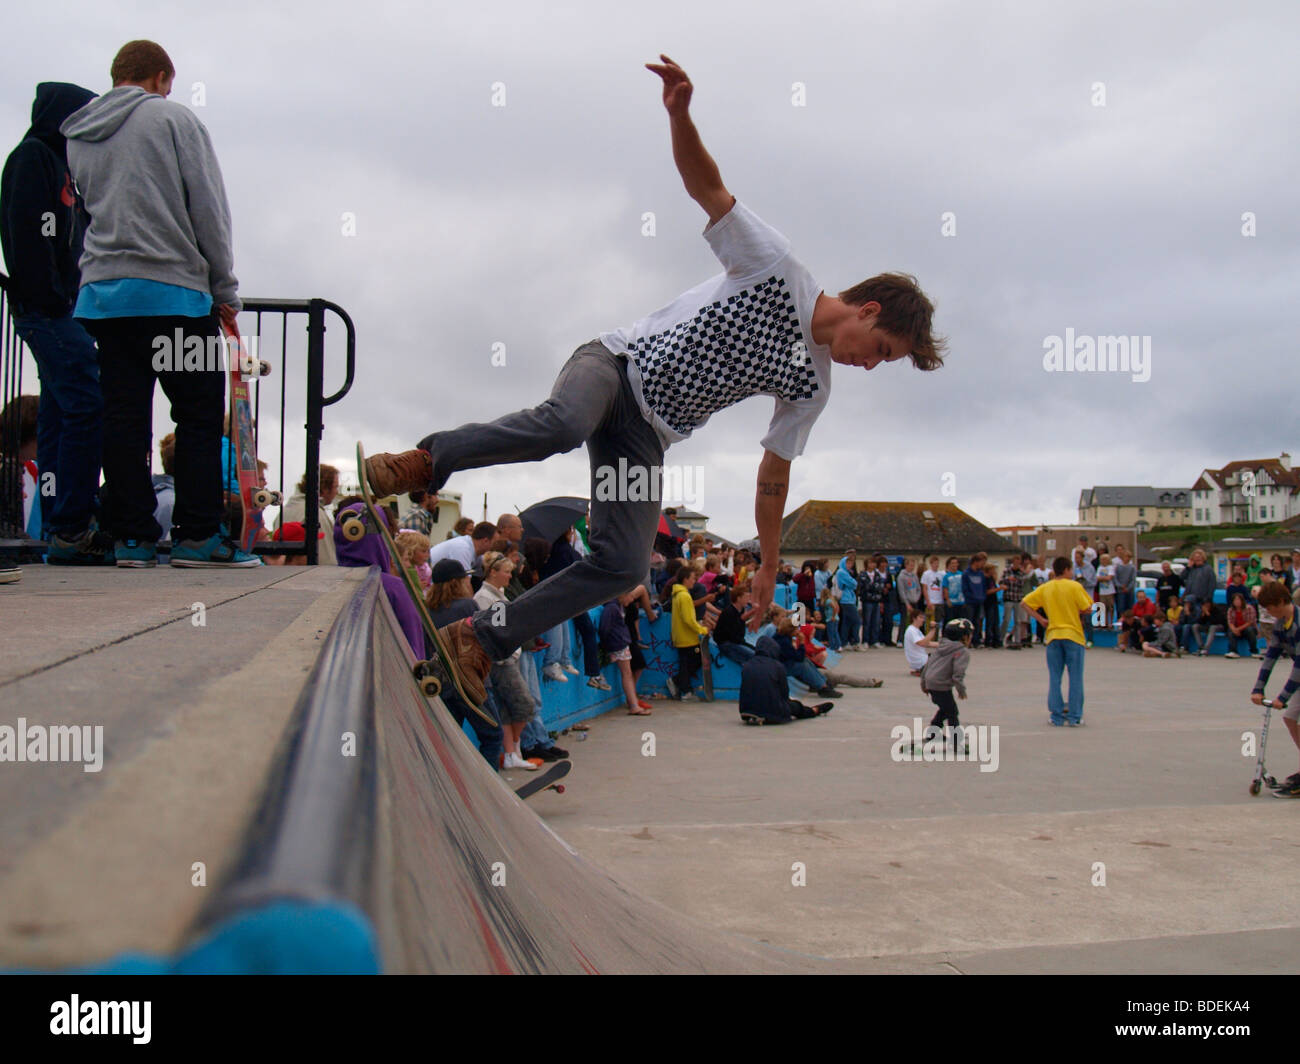 Skateboarder during a skate competition, Bude, Cornwall. Stock Photo